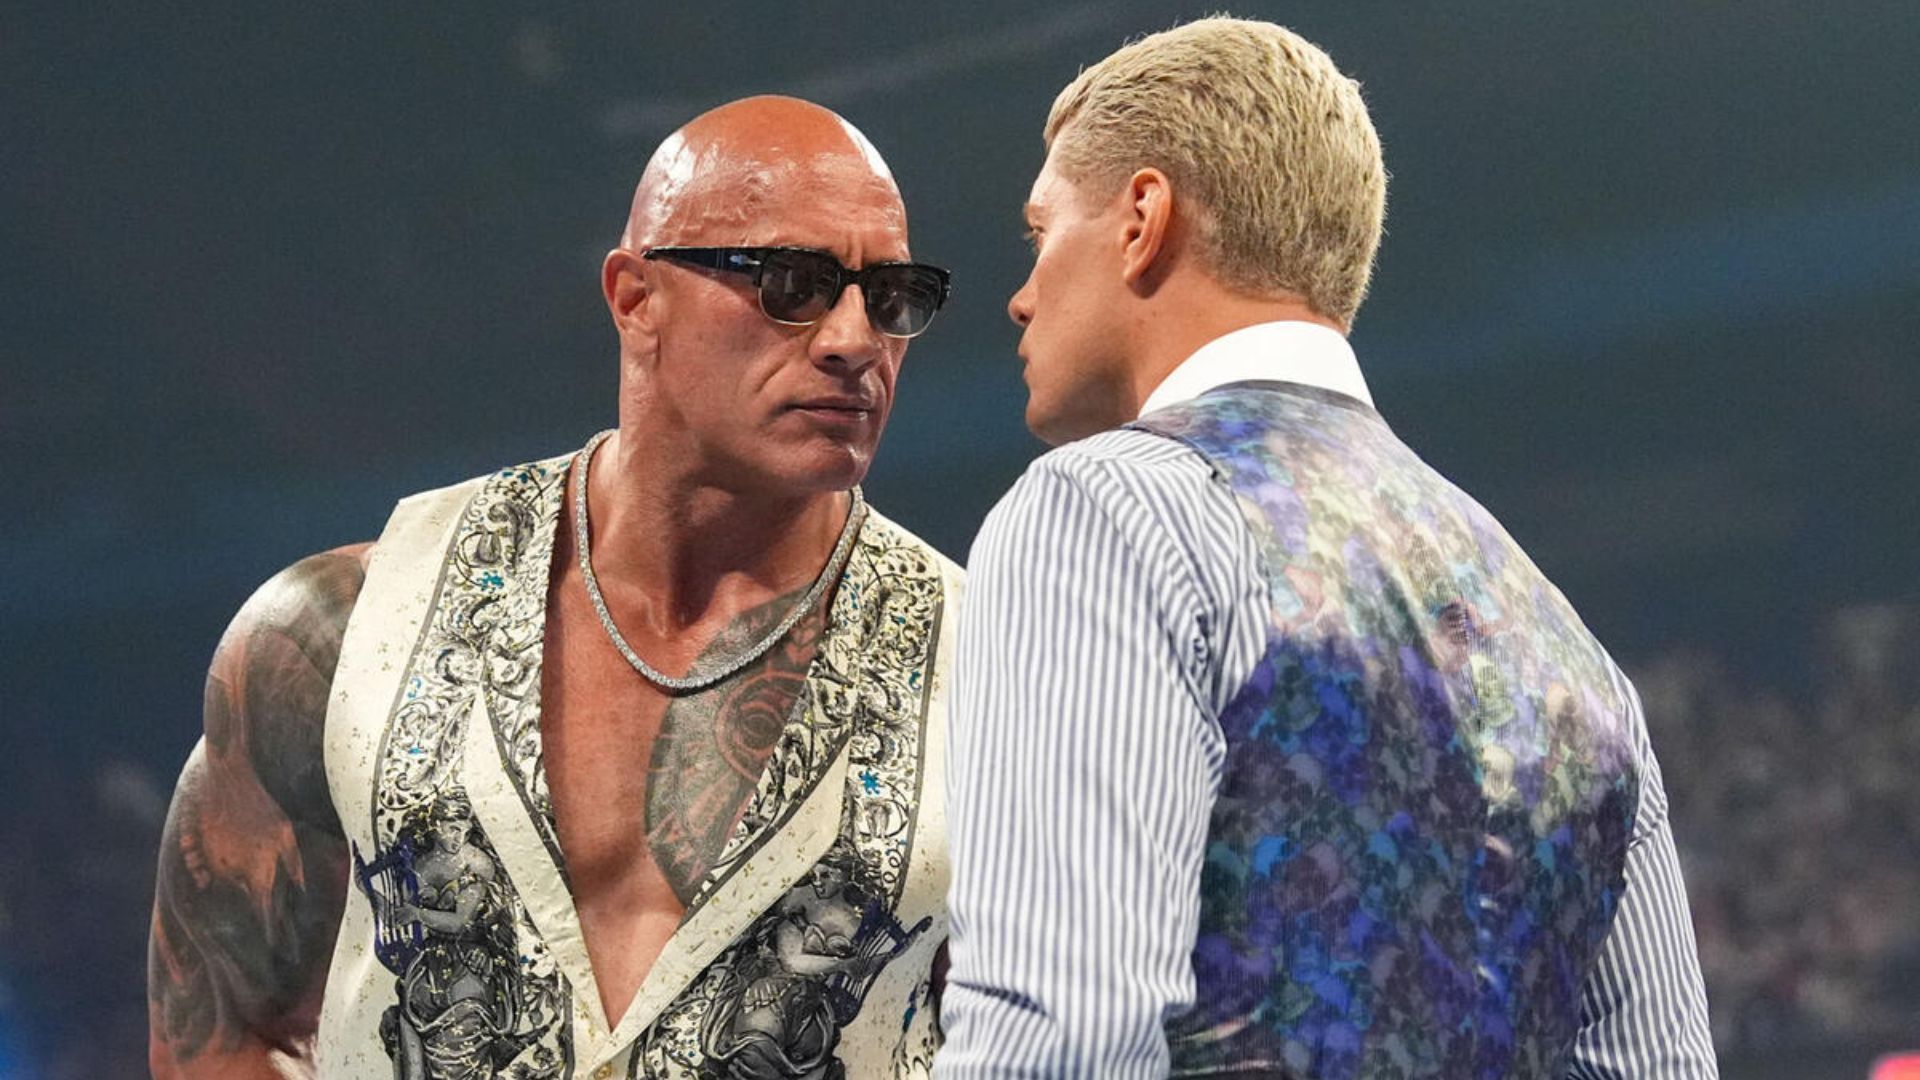 The Rock wants to make sure Cody Rhodes doesn